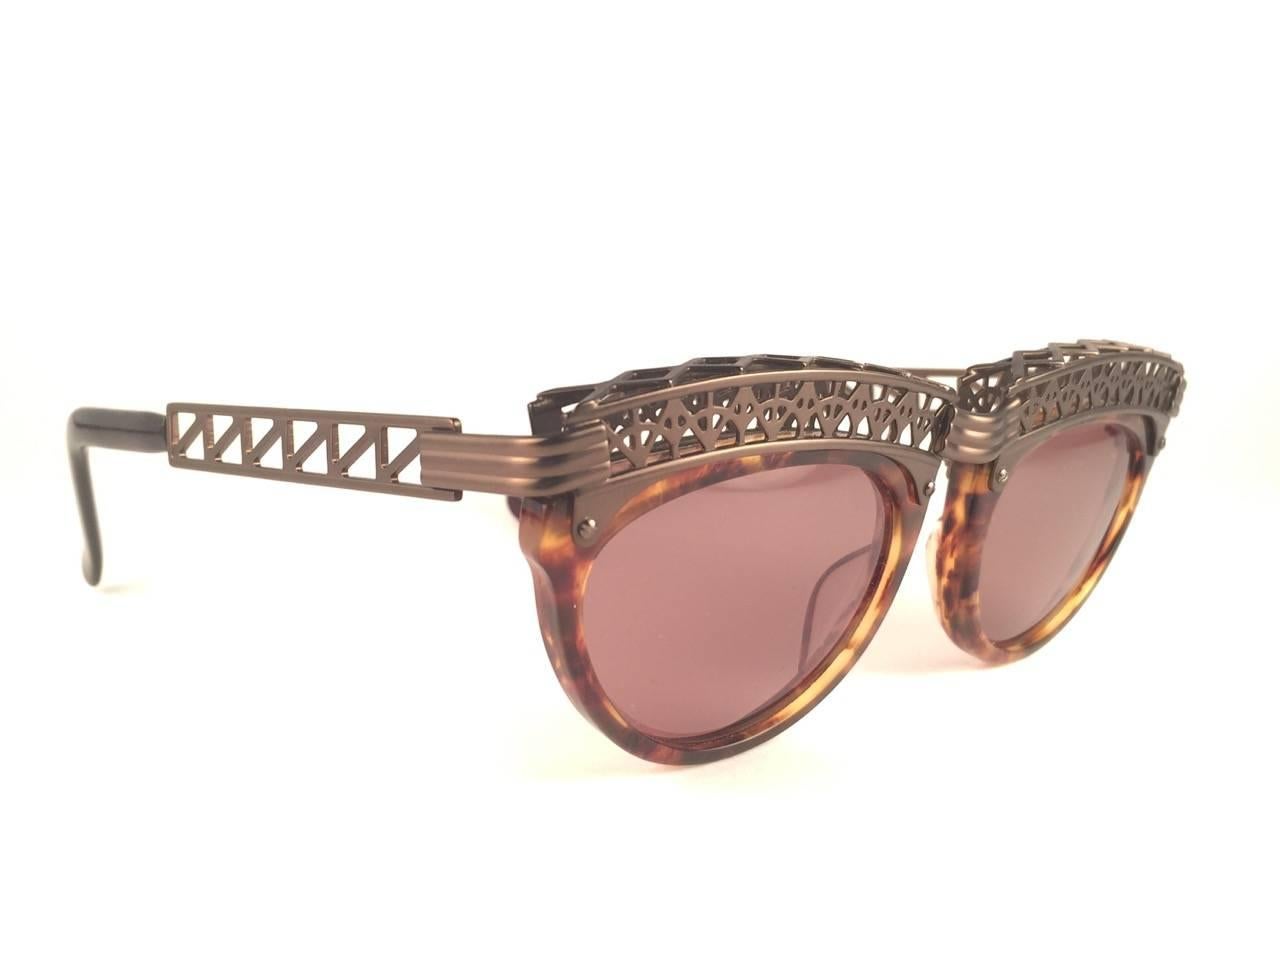 Superb Collectors Item!!
New Jean Paul Gaultier 56 0271 Eiffel Tower Copper Ornaments over tortoise frame. 
Spotless dark amber lenses that complete a ready to wear JPG look.

Amazing design with strong yet intricate details.
Design and produced in